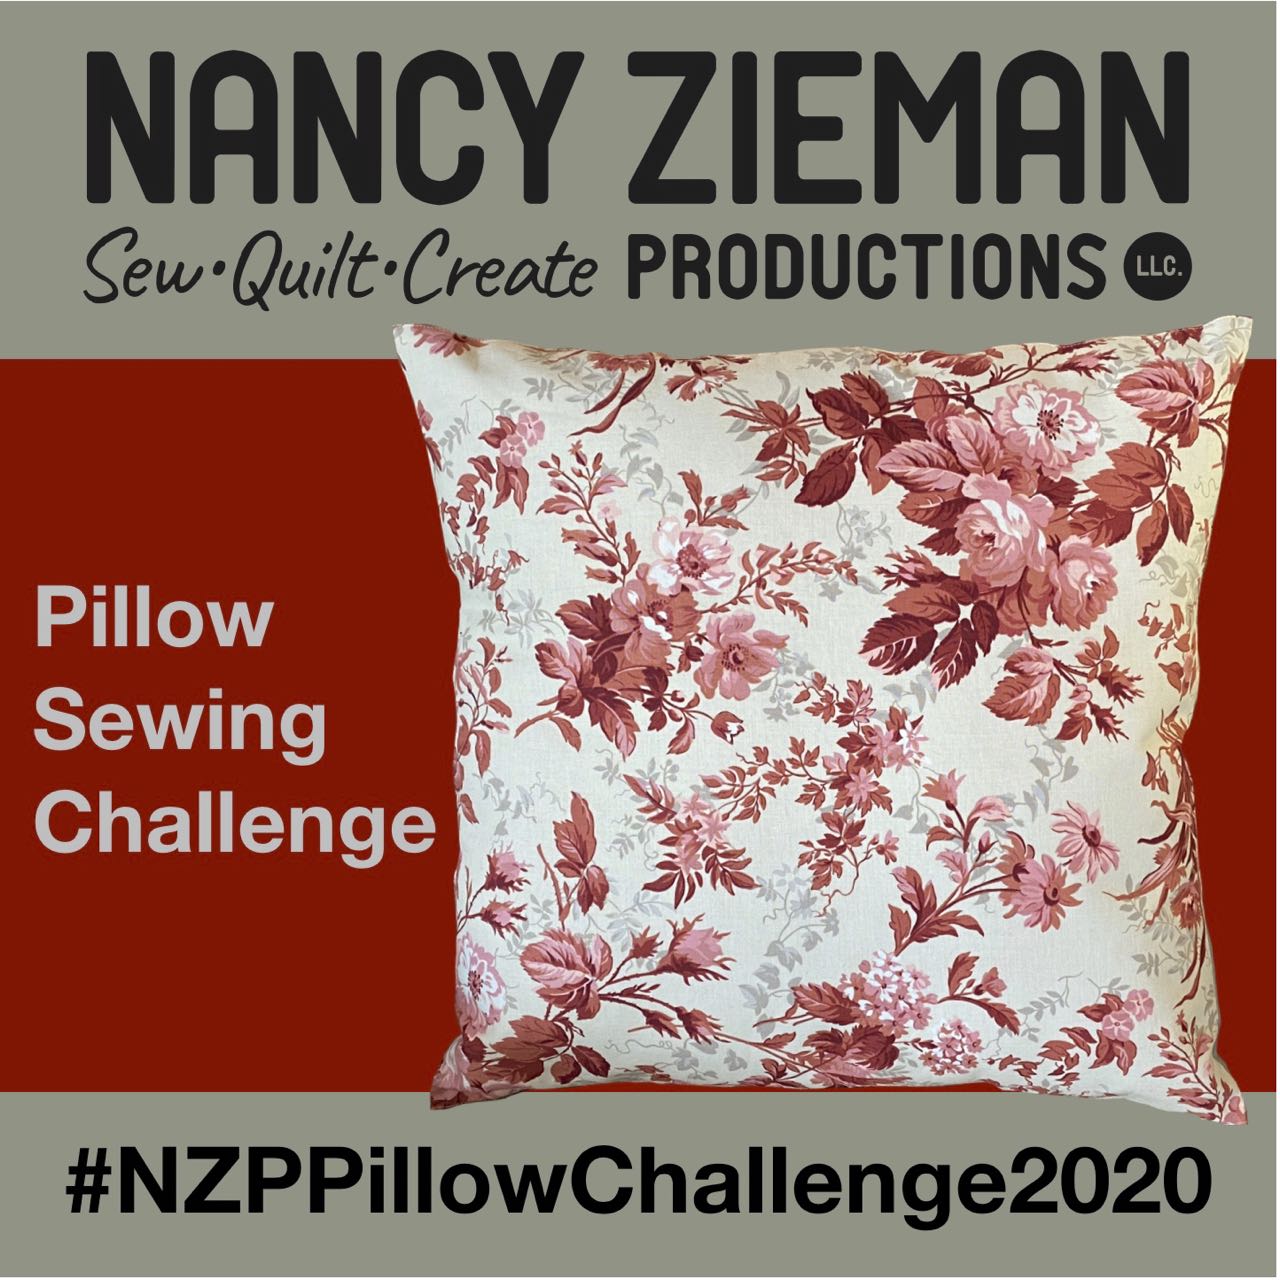 2020 NZP Pillow Sewing Challenge 